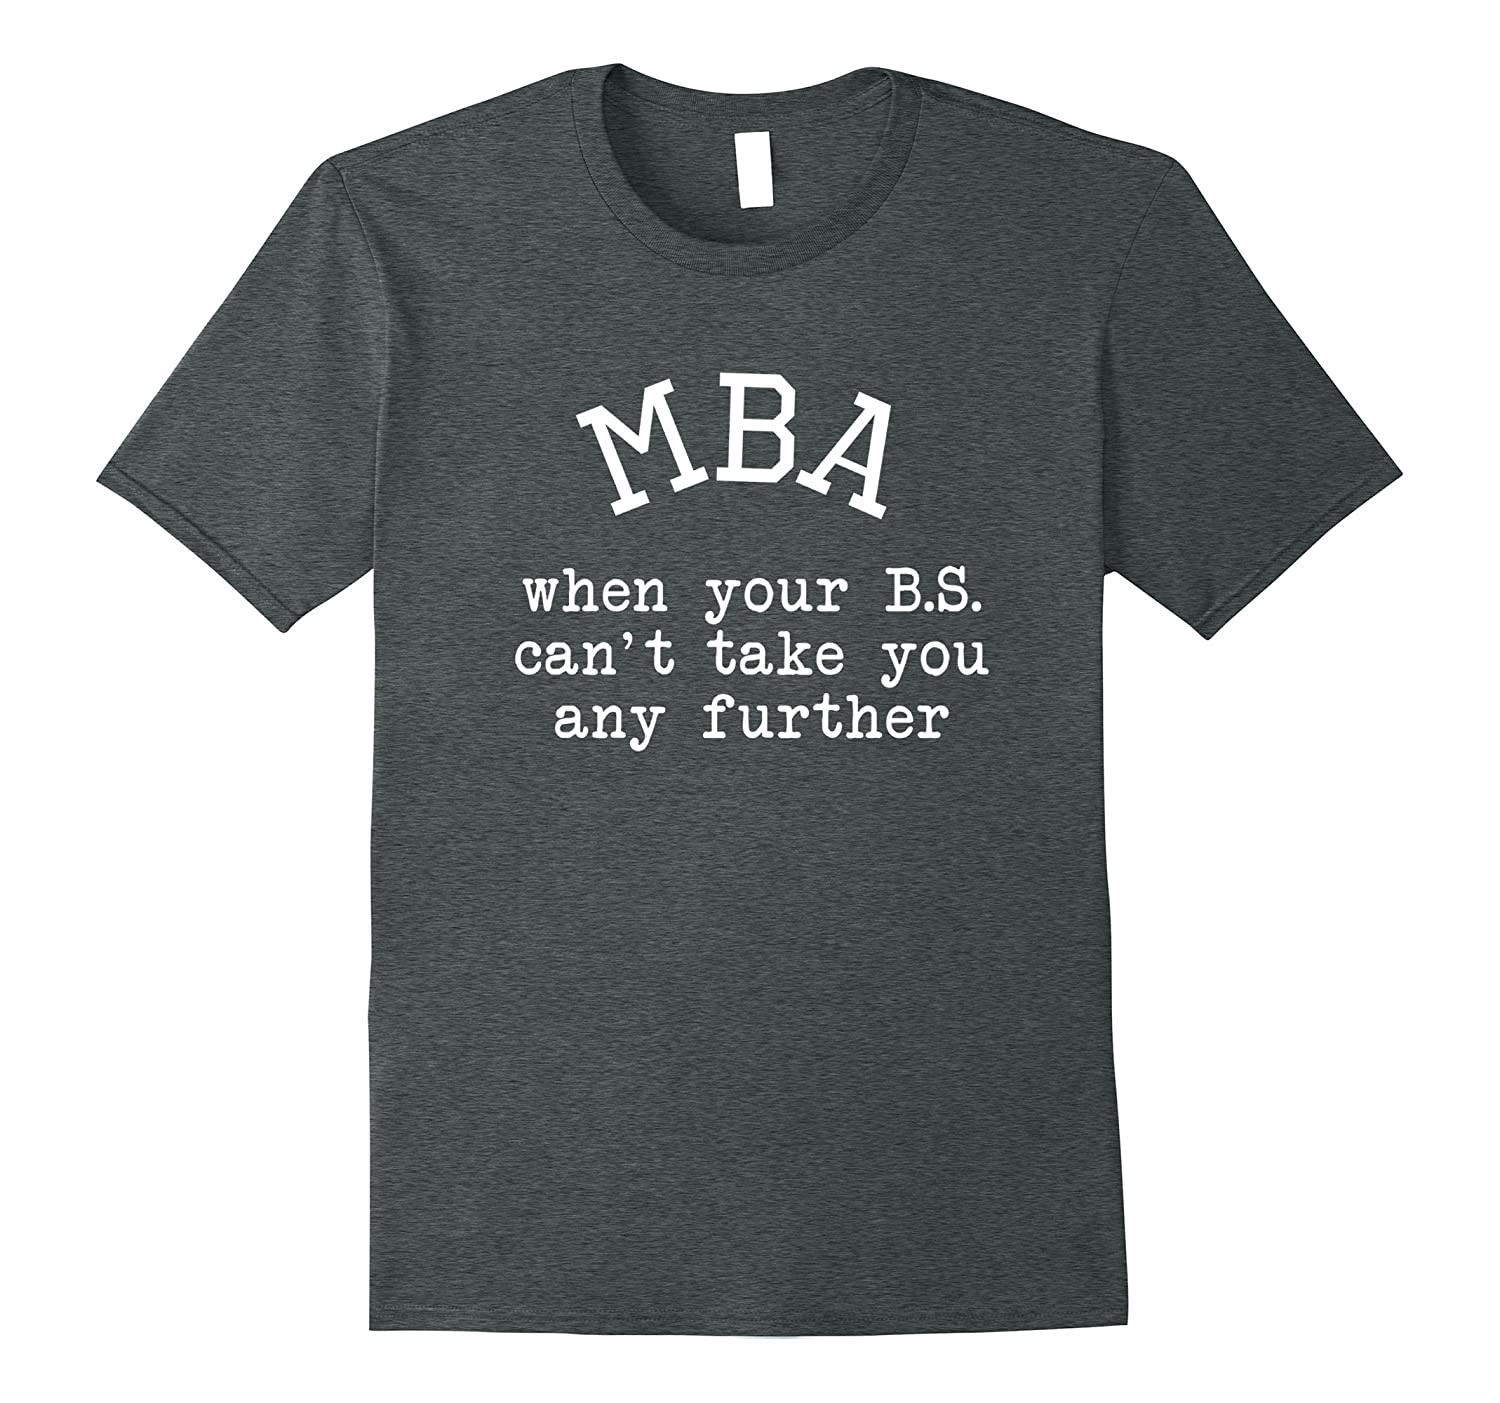 Mba Graduation Gift Ideas For Him
 Best 25 Graduation Gift Ideas for Him Master s Degree